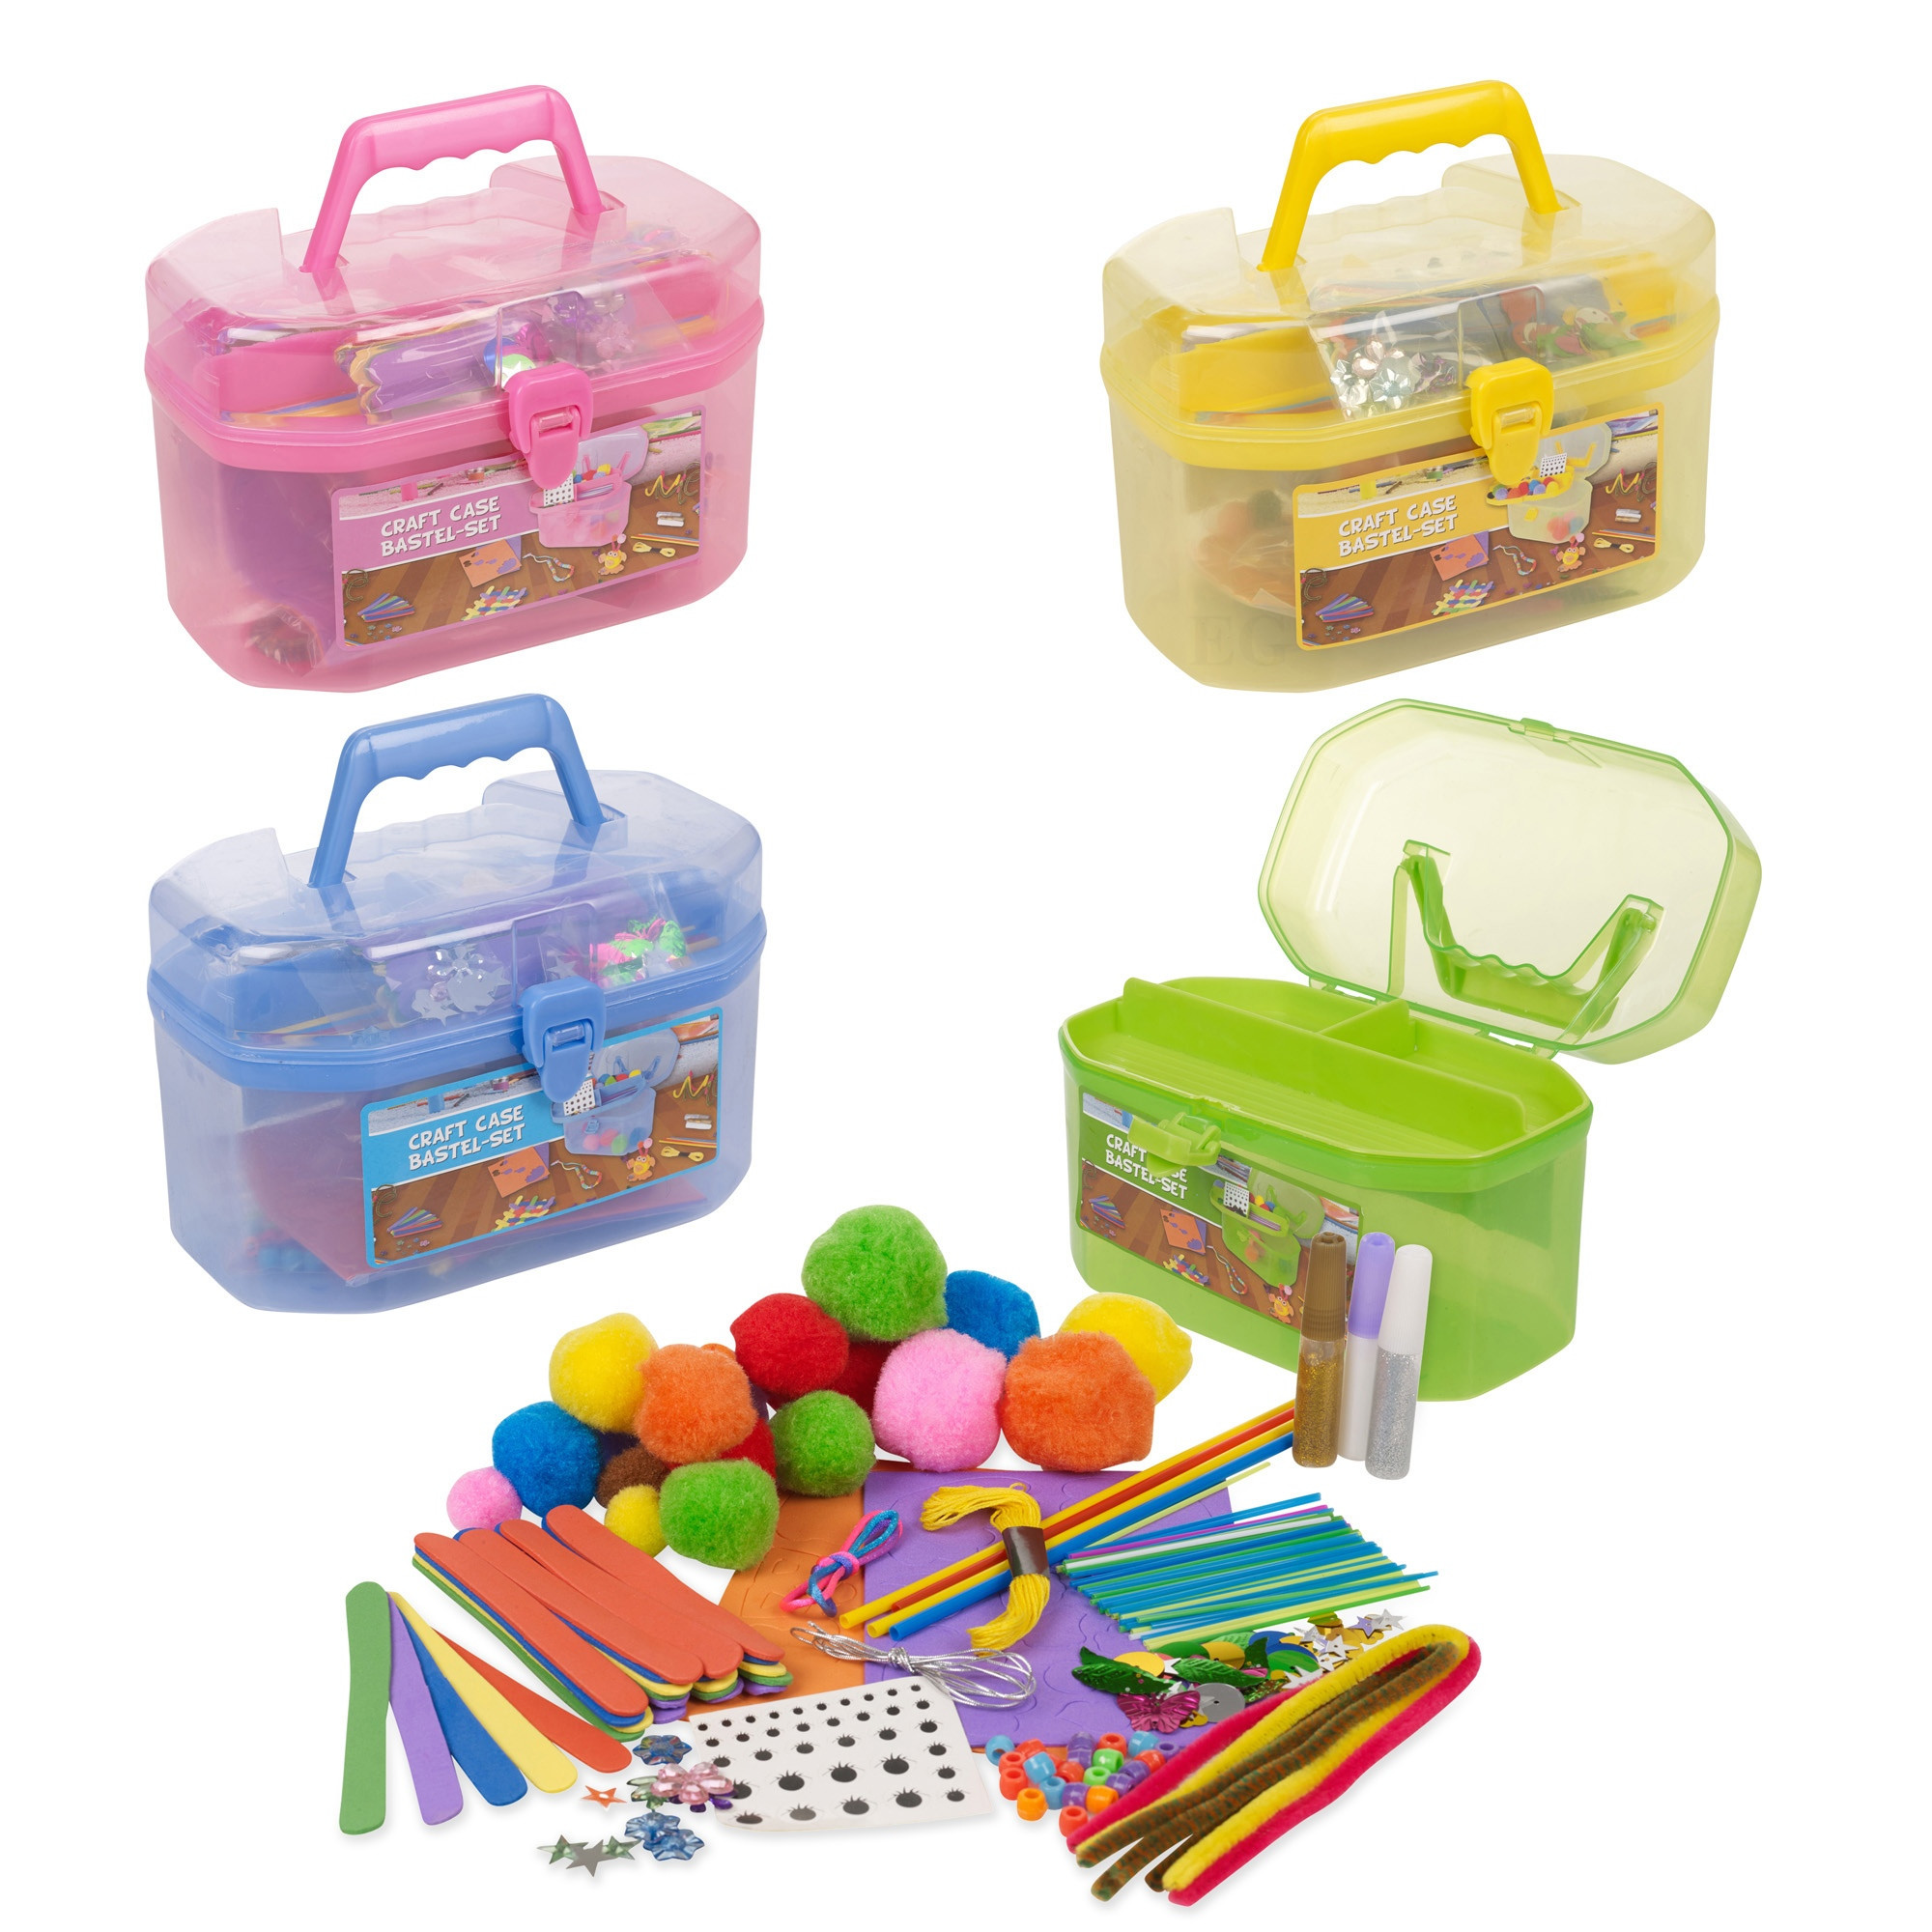 Arts And Crafts Toys For Kids
 127 Piece Children s Arts & Craft Set Case Carry Handle